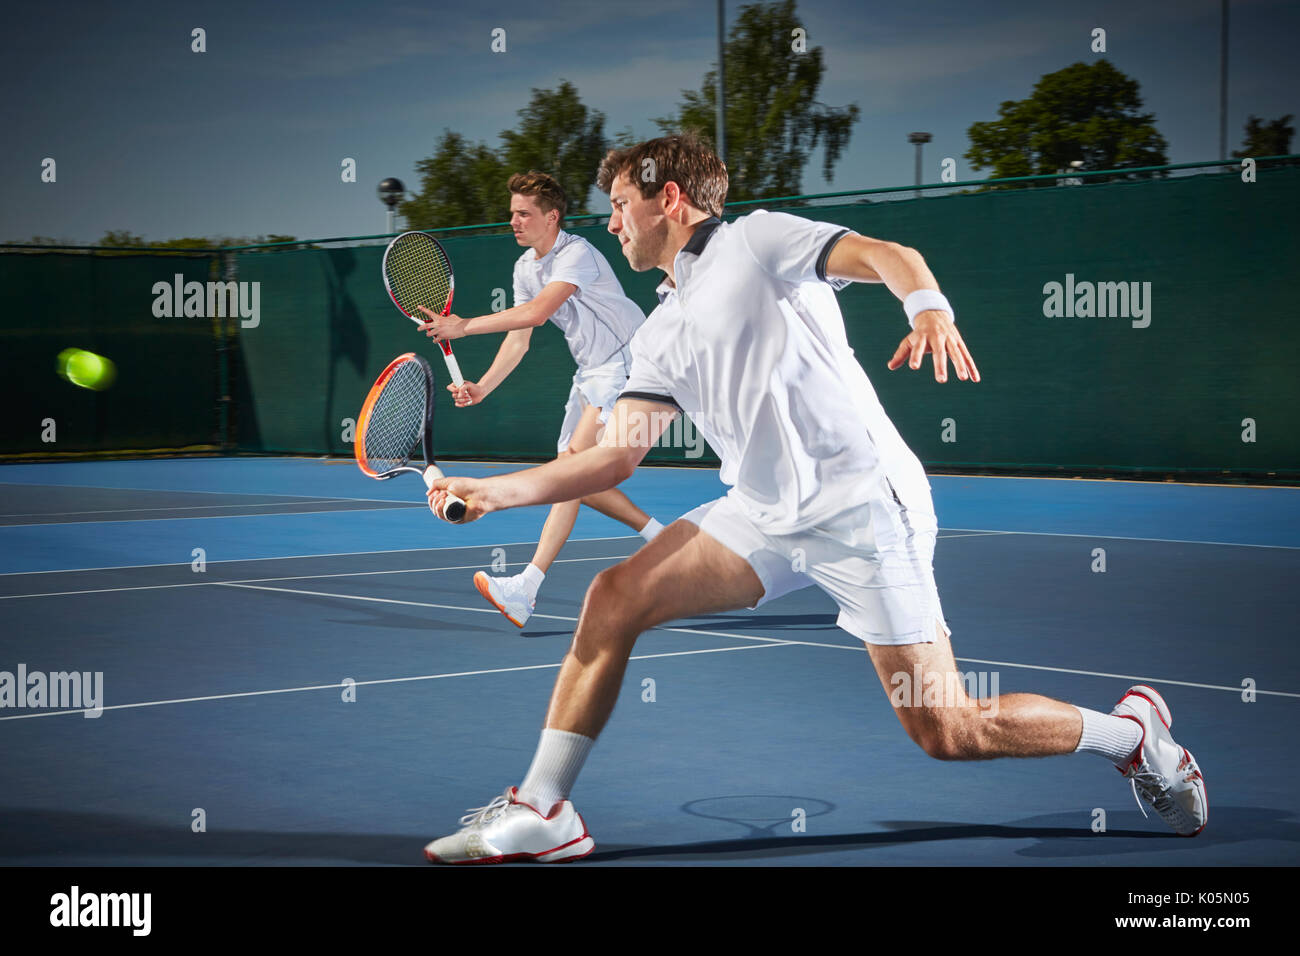 Young male tennis doubles players playing tennis, hitting the ball on blue tennis court Stock Photo